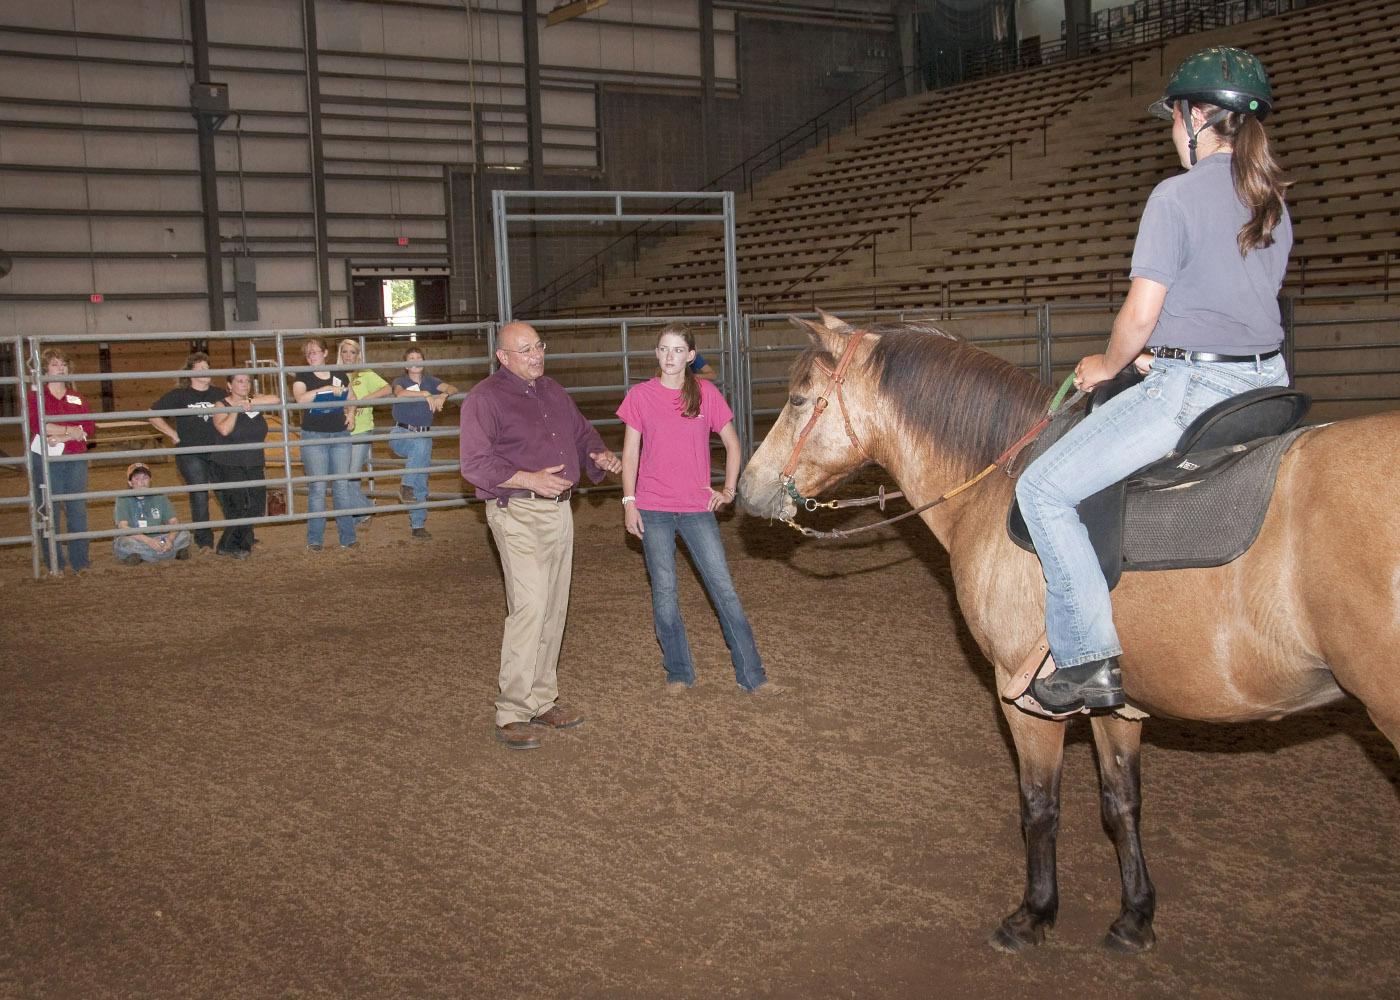 Anthony Busacca, a master's level instructor with the North American Riding for the Handicapped Association, teaches Hannah Miller, standing, and Natalie Clark Langston methods for effective and safe therapy sessions. (Photo by Scott Corey)